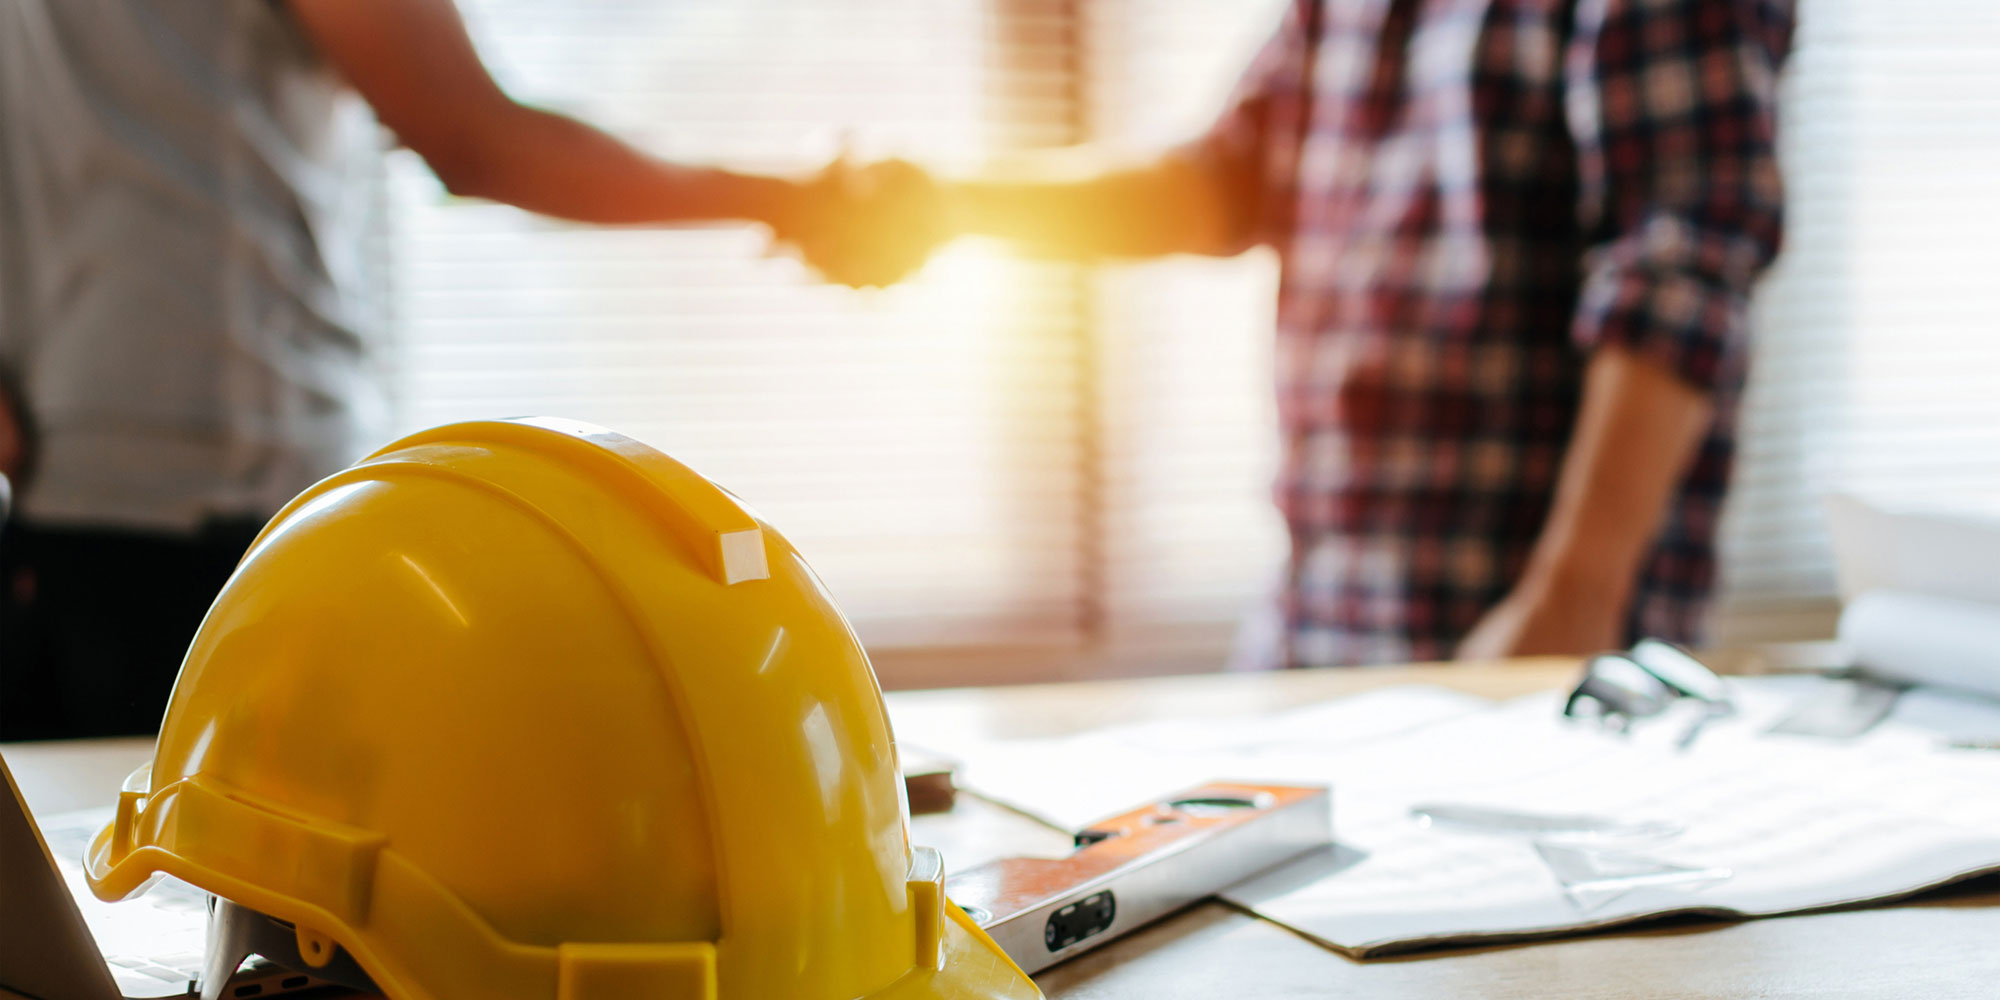 Two men shaking hands with hardhat in the foreground